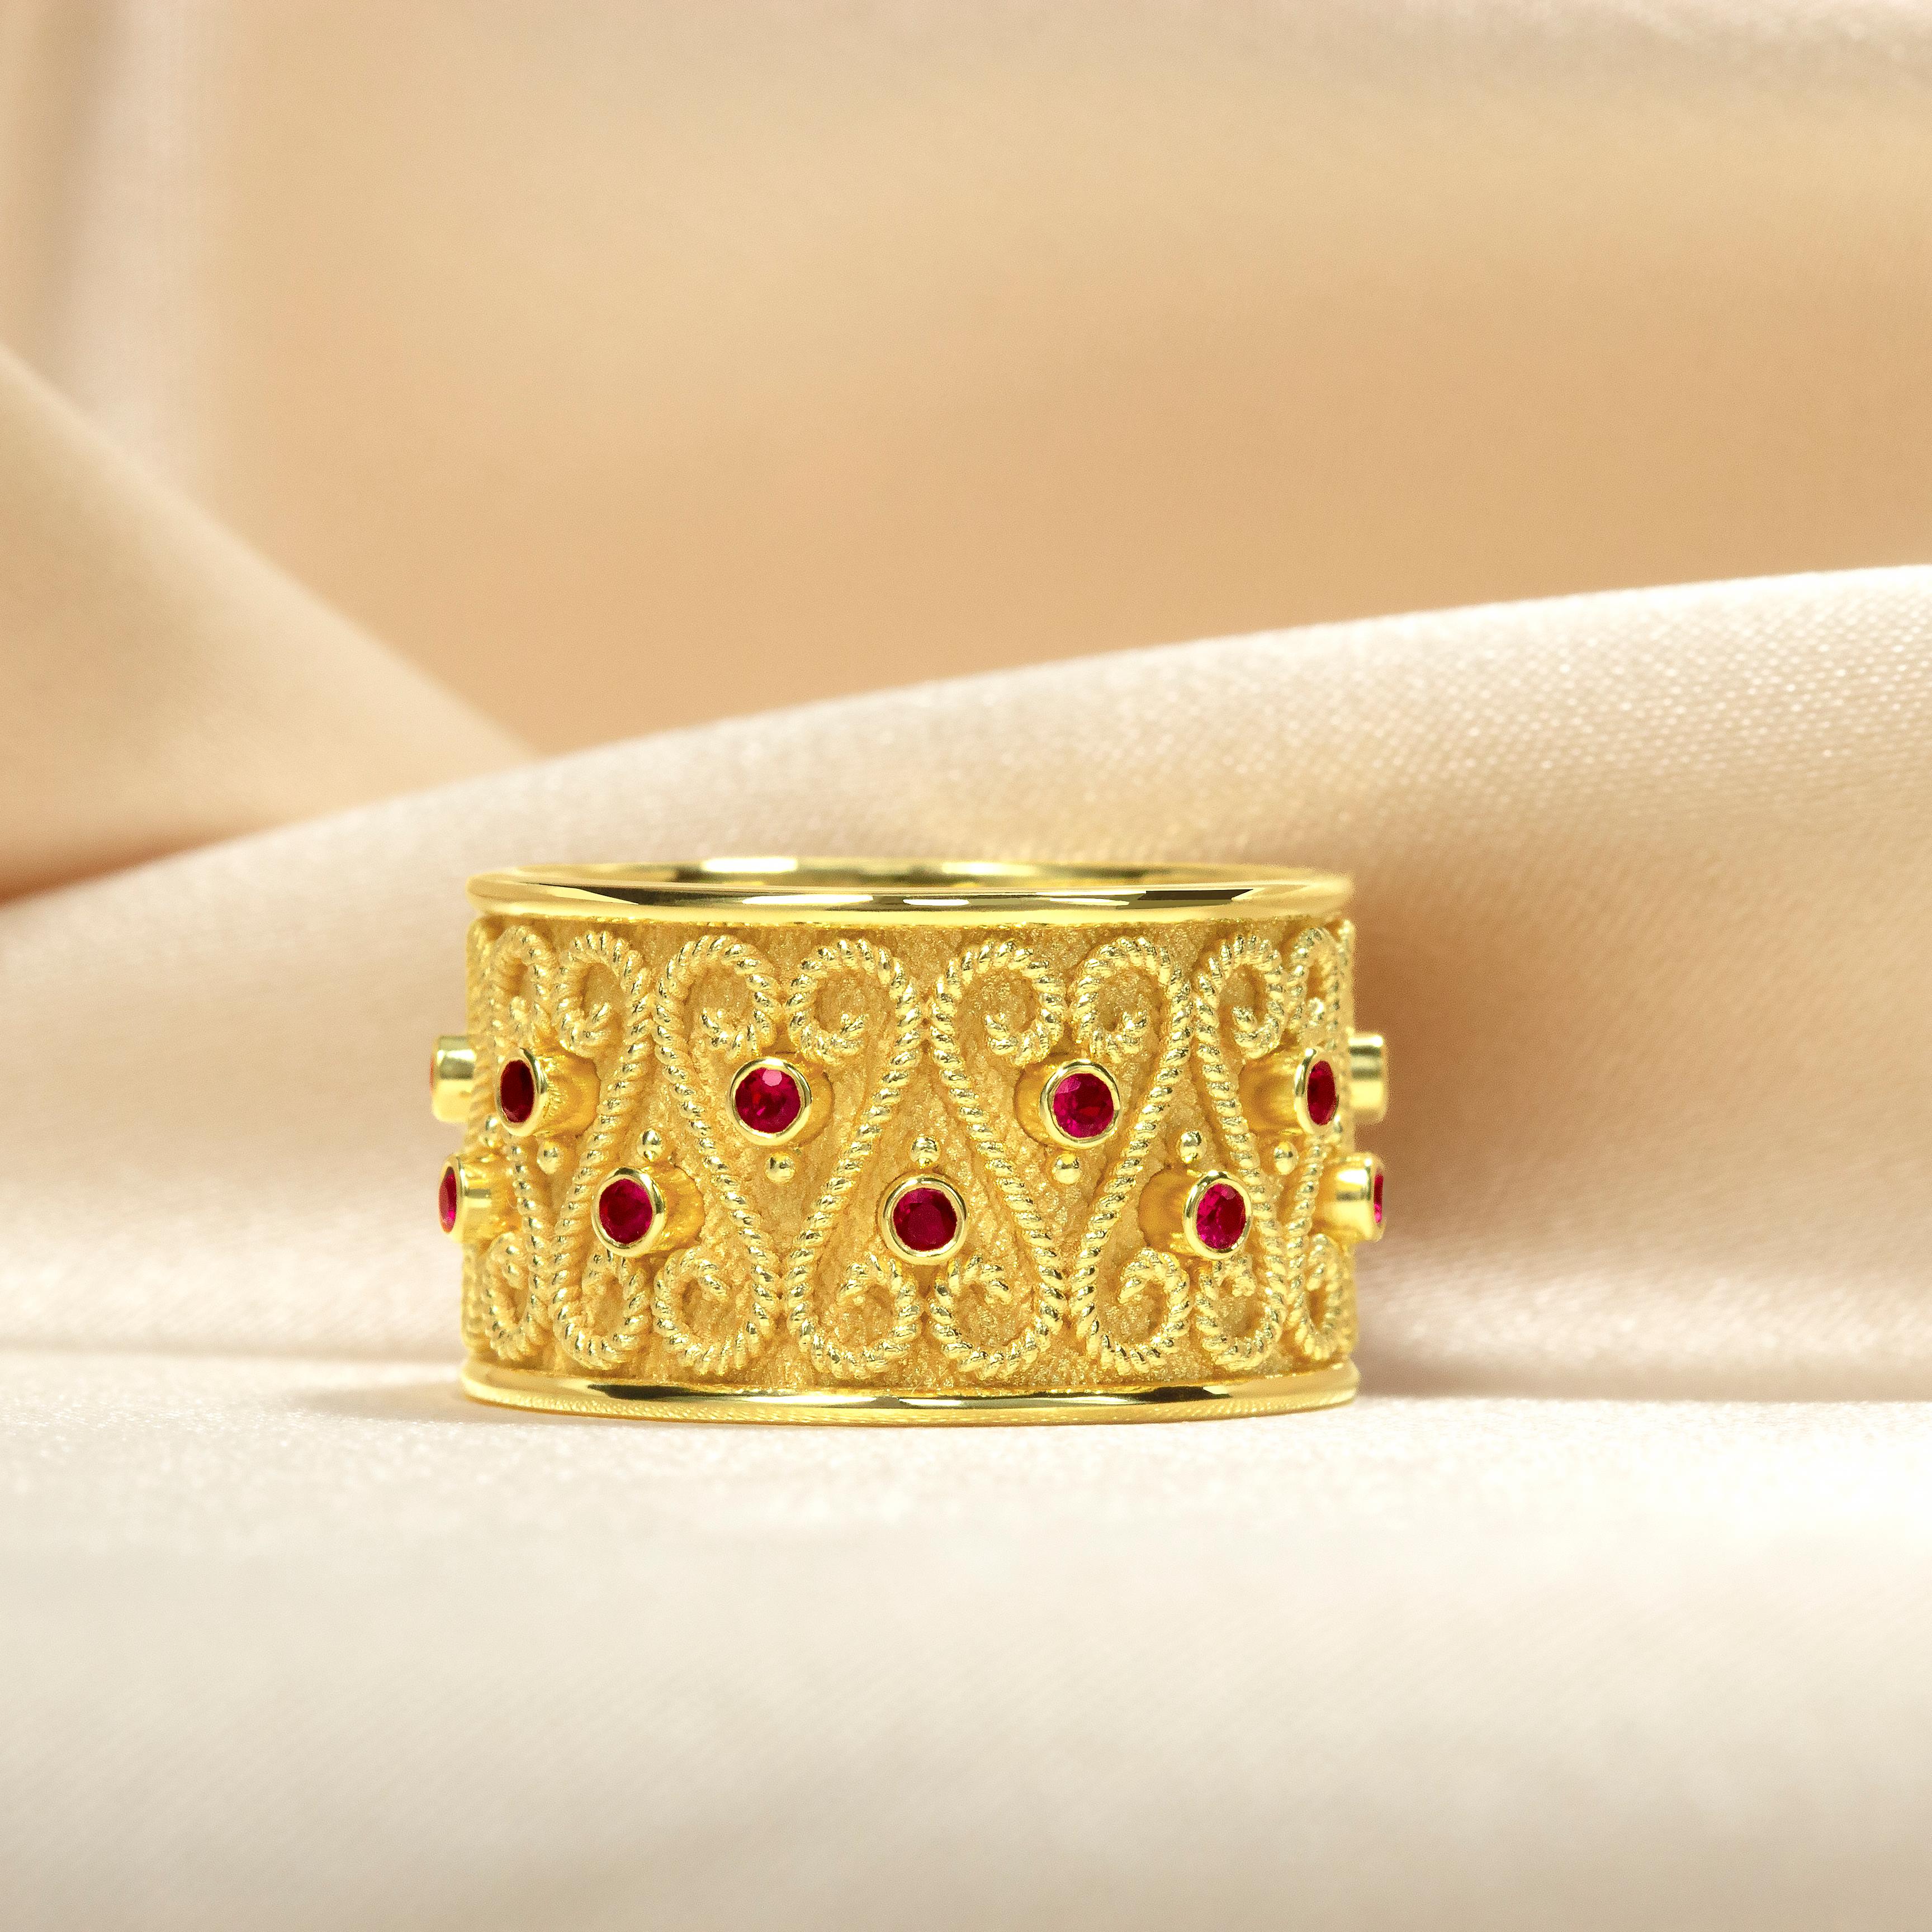 This elegant gold band ring, adorned with shimmering rubies, is the perfect choice for a sophisticated woman. Crafted from luxurious materials, it adds a touch of opulence to any wardrobe. An exquisite piece of craftsmanship, this beautiful ring is